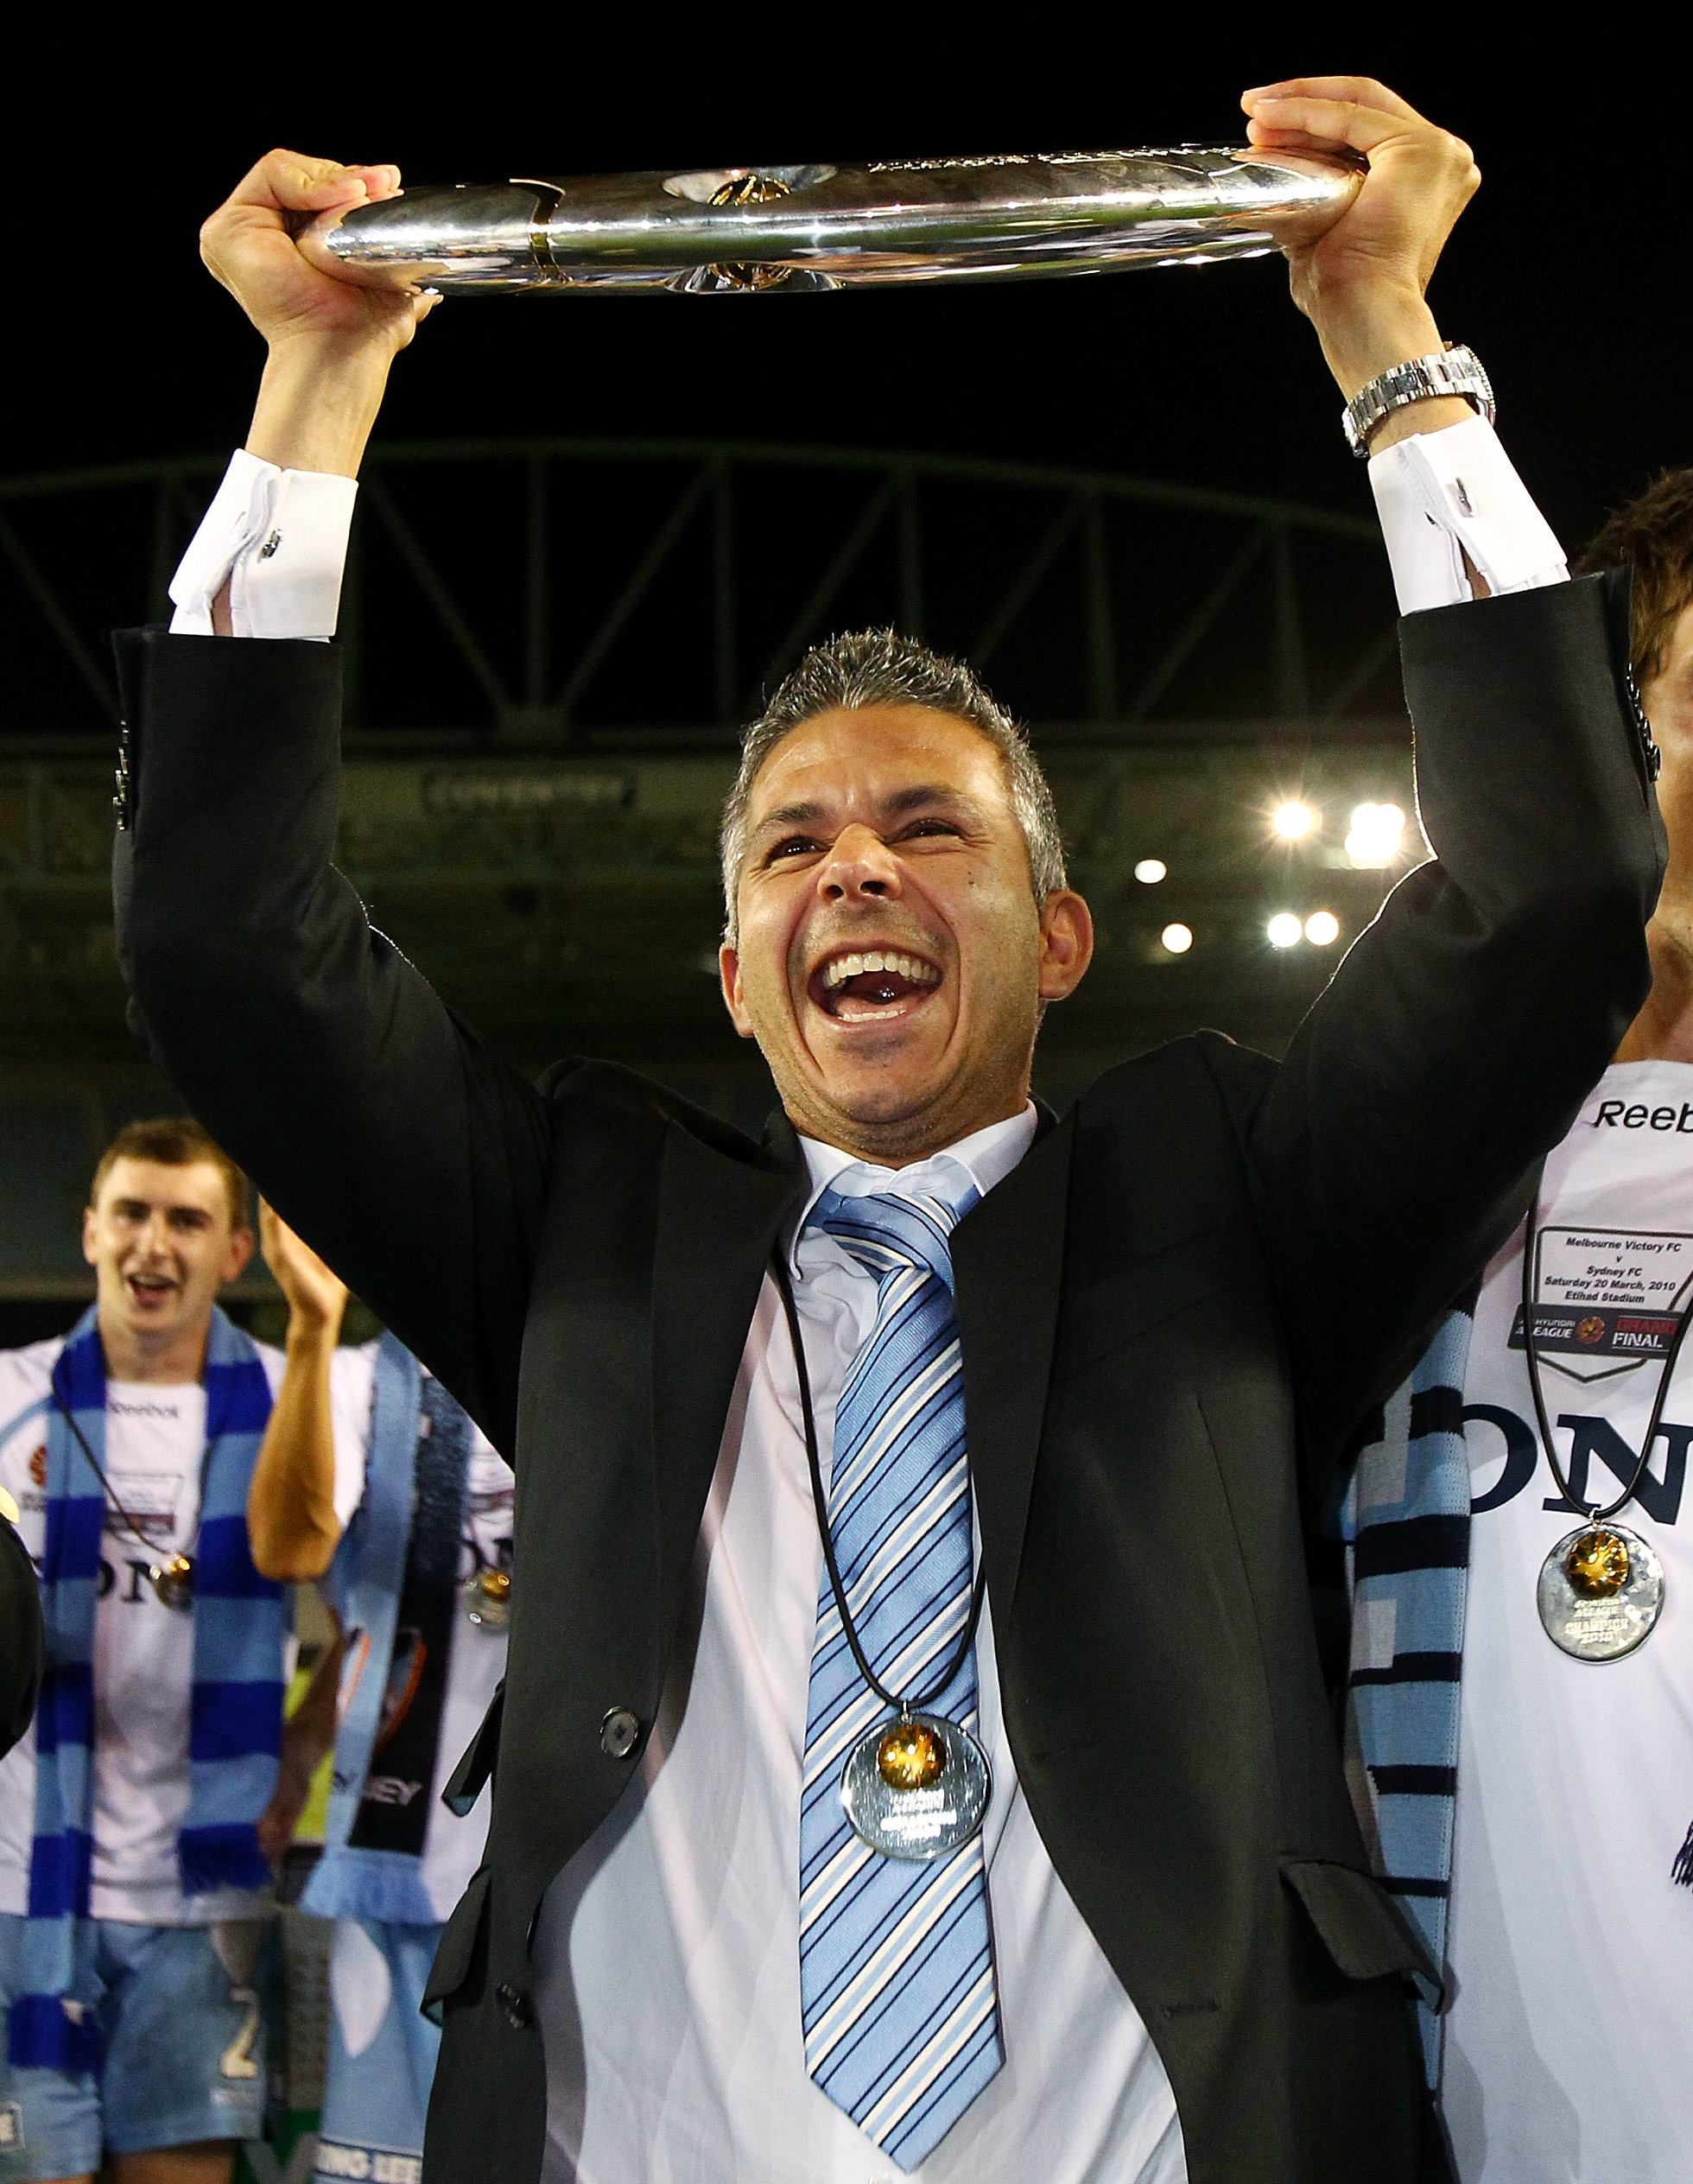 More Grand Final glory for Corica and Sydney FC in 2010.